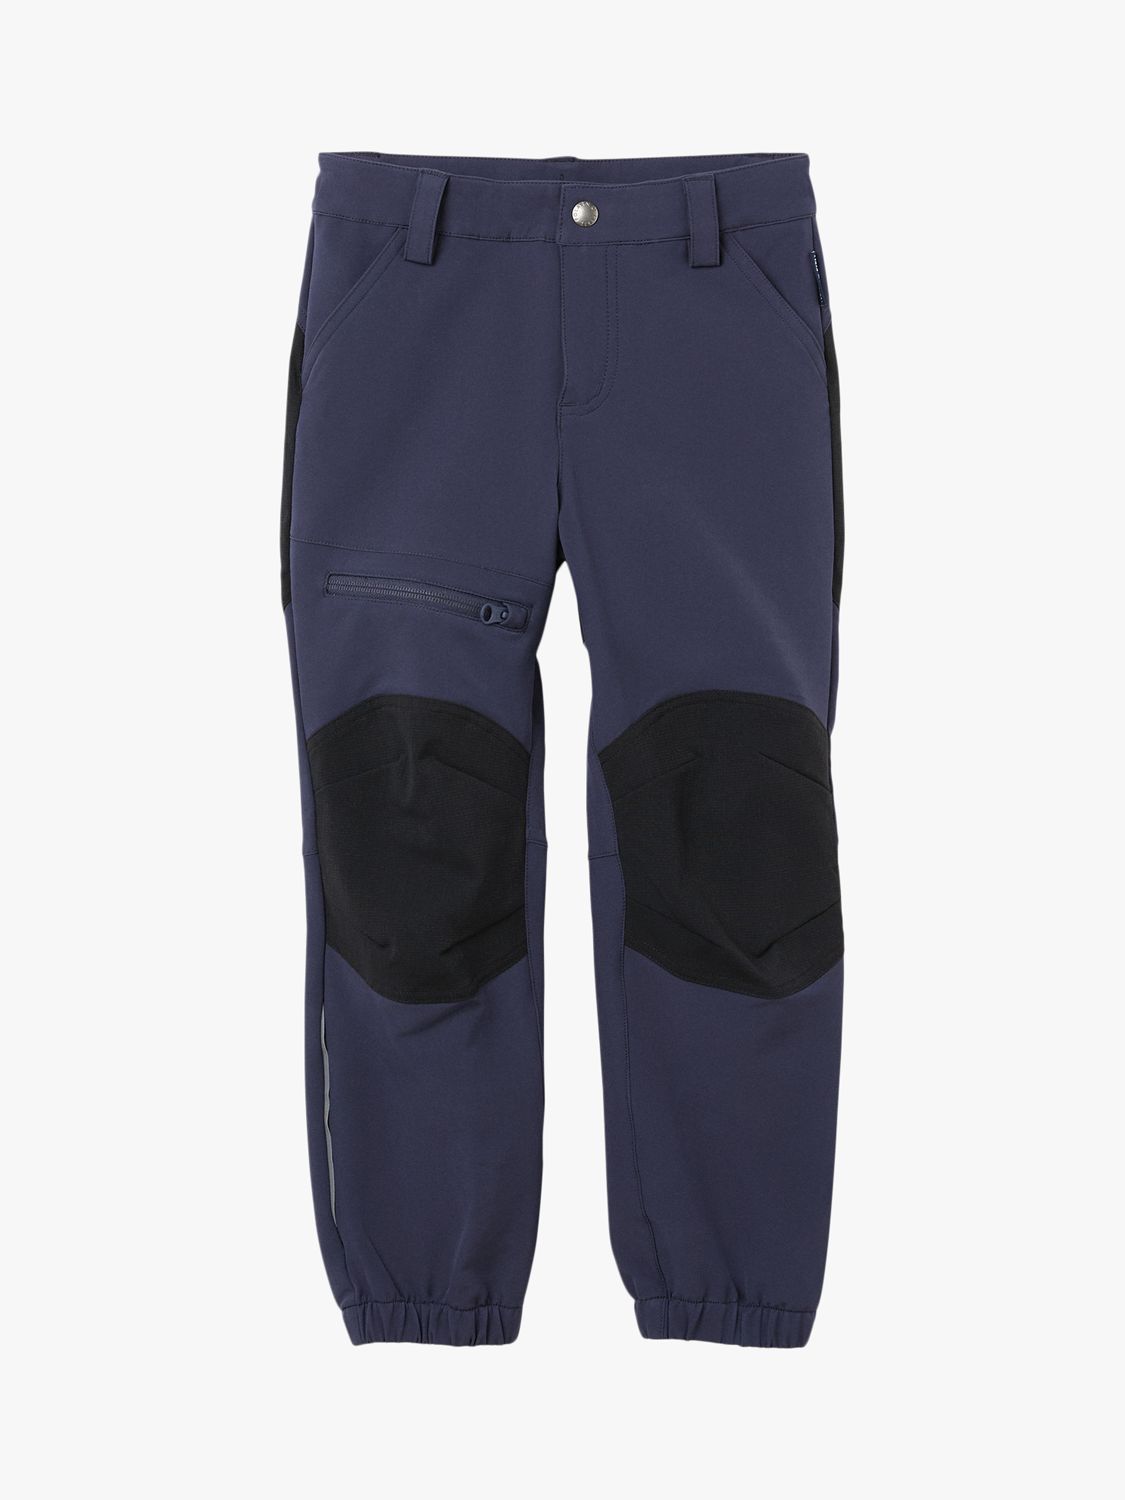 Buy Polarn O. Pyret Kids' Recycled Water Resistant Outerwear Trousers, Blue Online at johnlewis.com